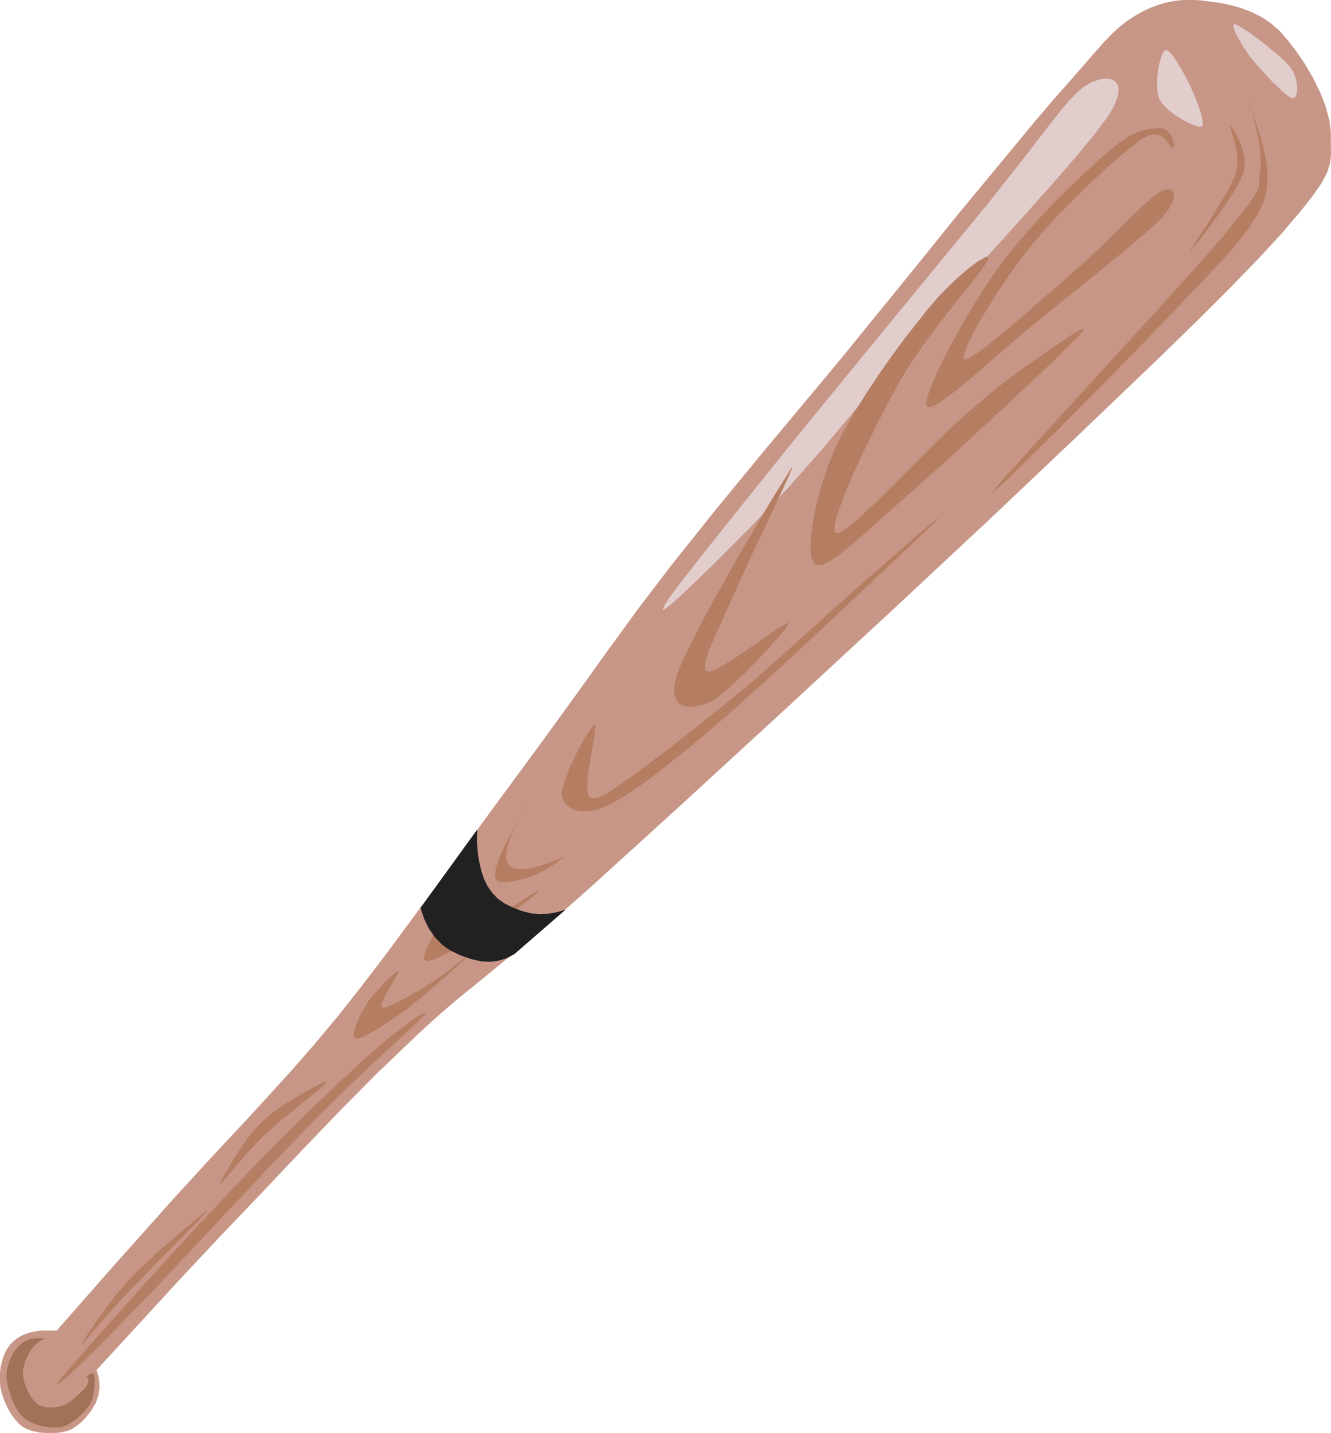 Transparent png pictures free. Glove clipart baseball bat